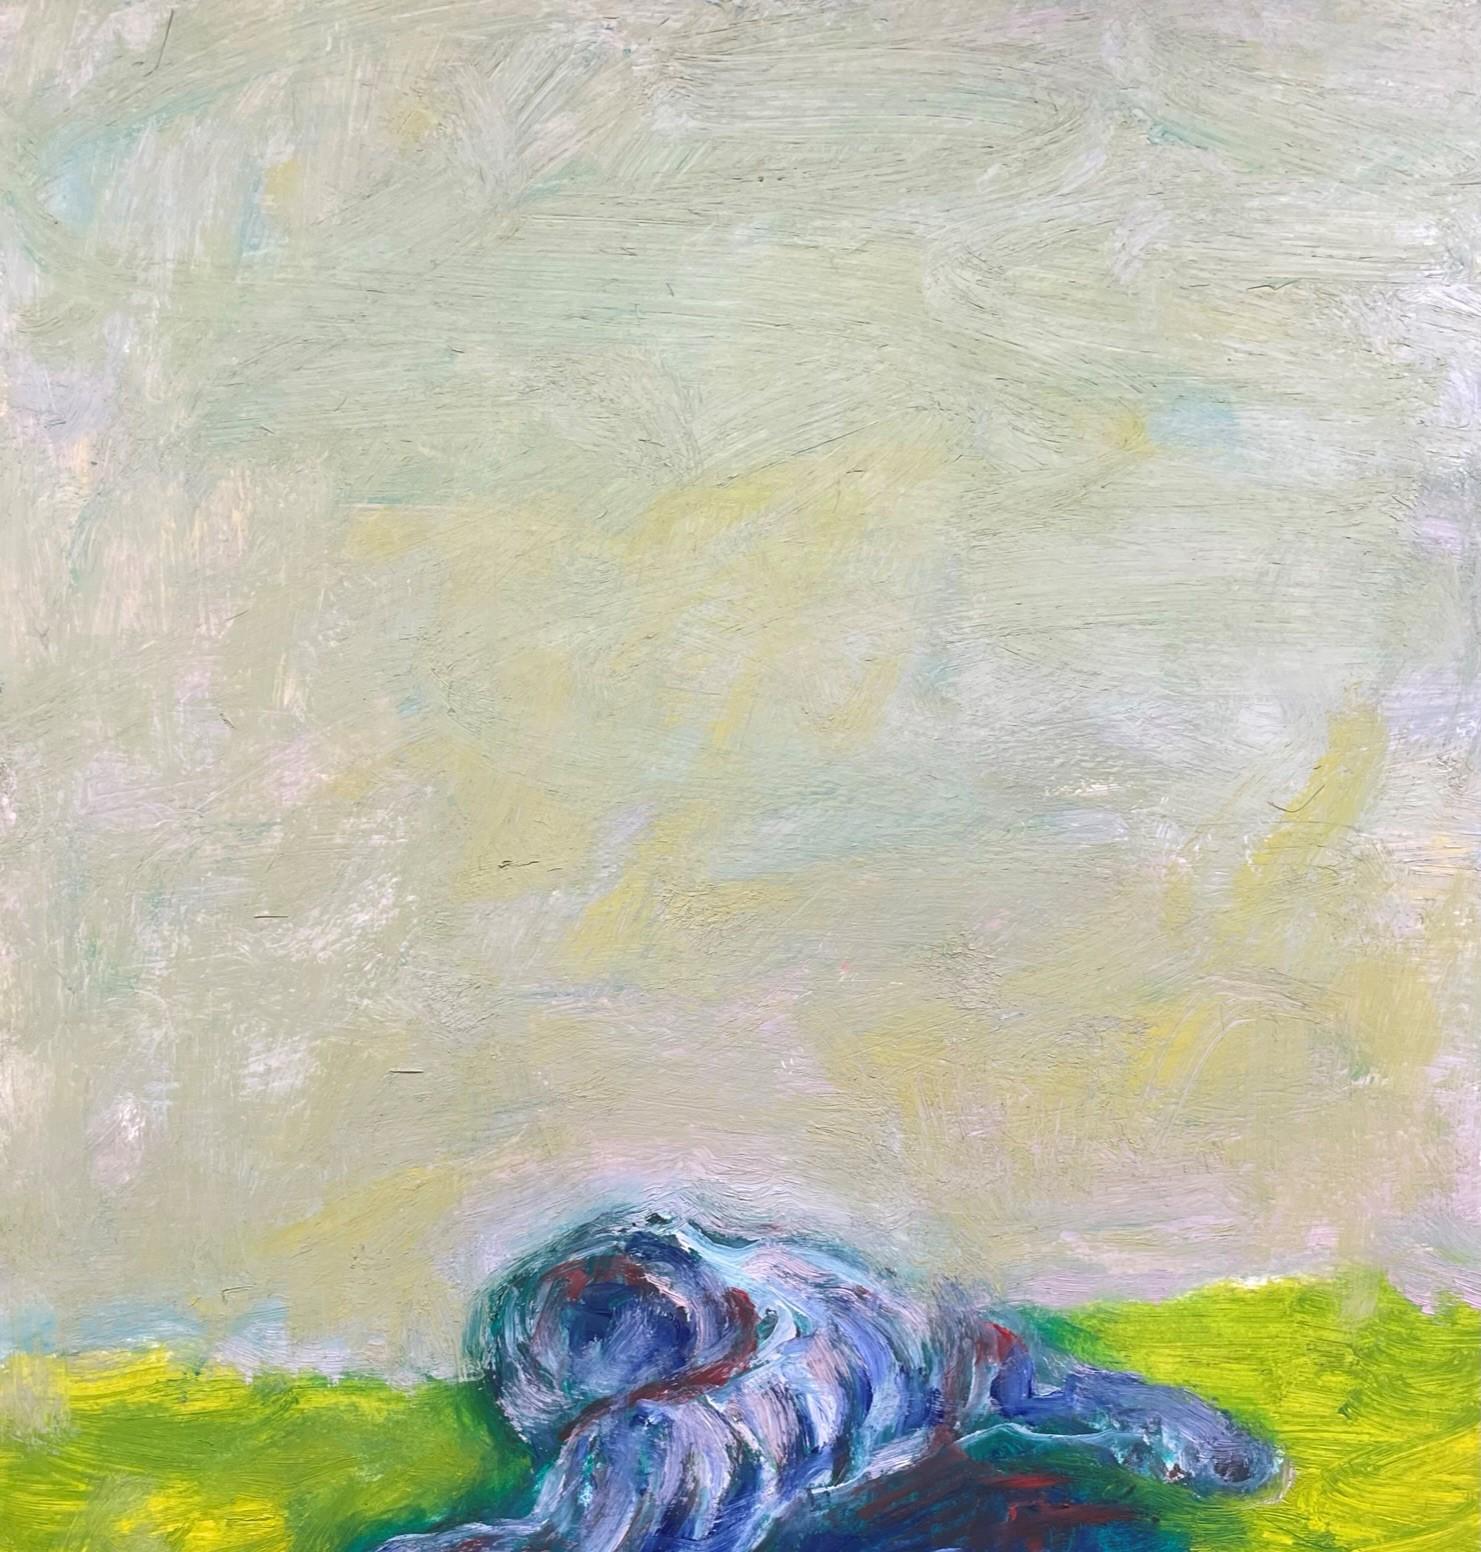 Remains (Body in the Field 12) - Contemporary, Green, Blue, Painting On Paper - Art by Zsolt Berszán